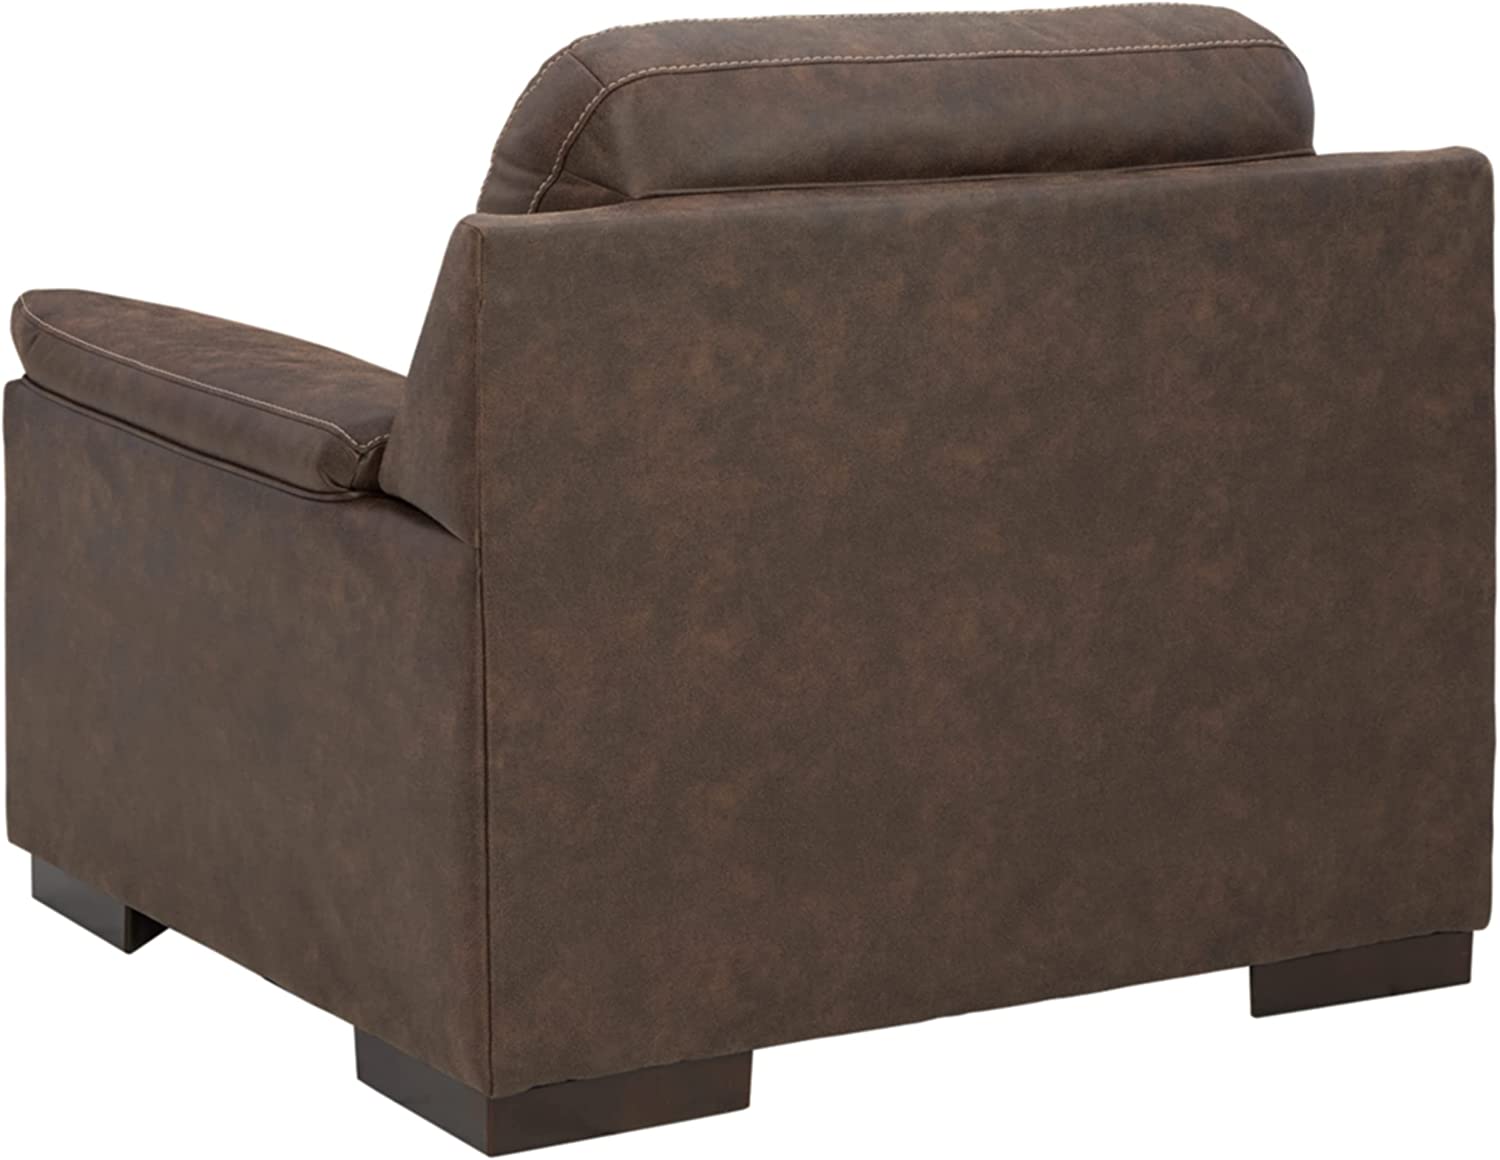 Ashley Maderla Modern Faux Leather Oversized Accent Chair, Walnut Brown-$280